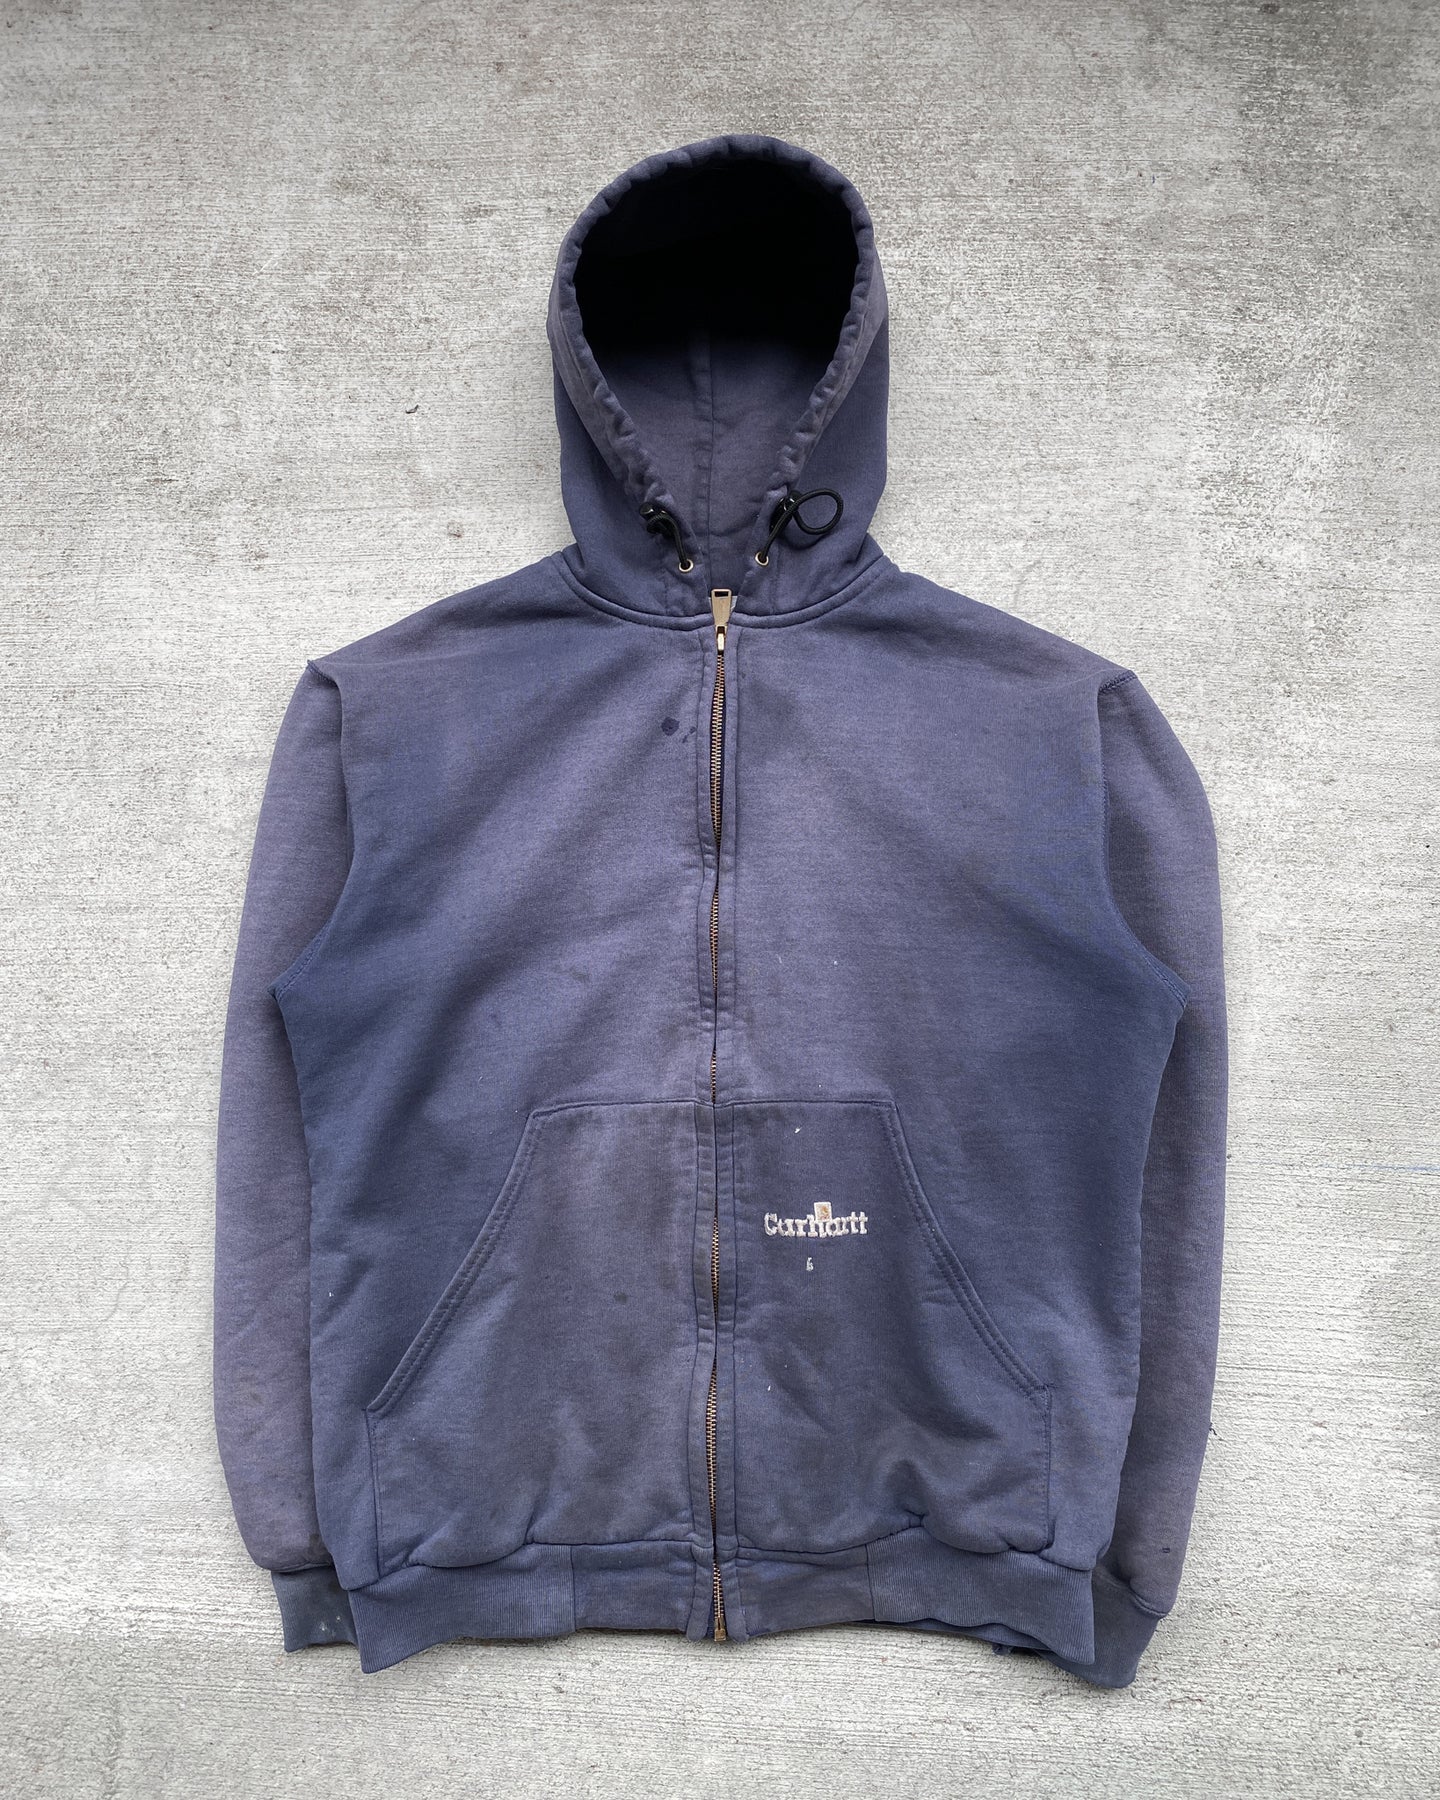 1990s Carhartt Sun Faded Navy Zip Up Work Hoodie - Size Large